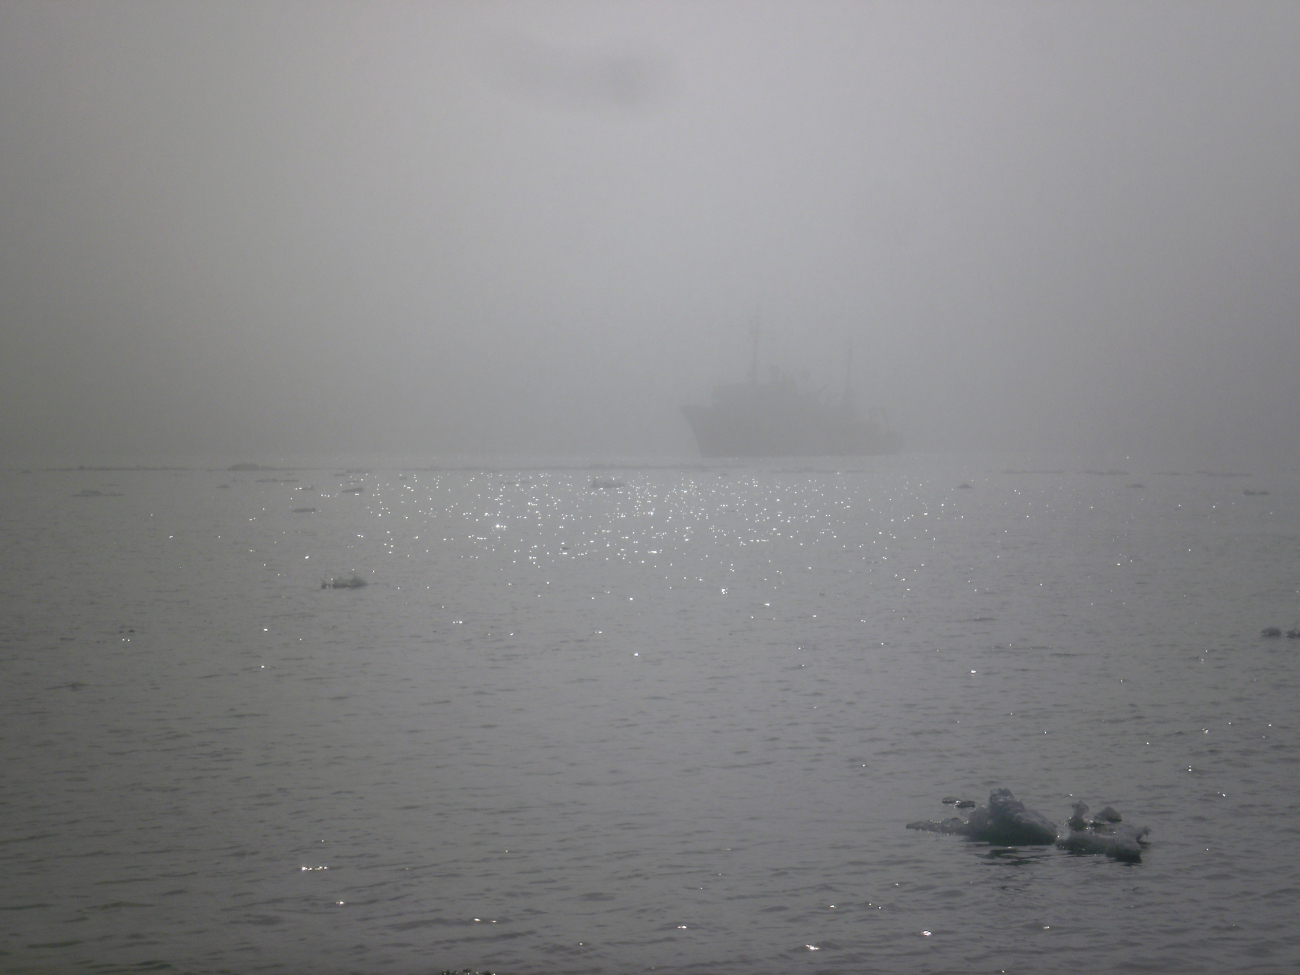 NOAA Ship FAIRWEATHER in the fog of the southern Beaufort Sea